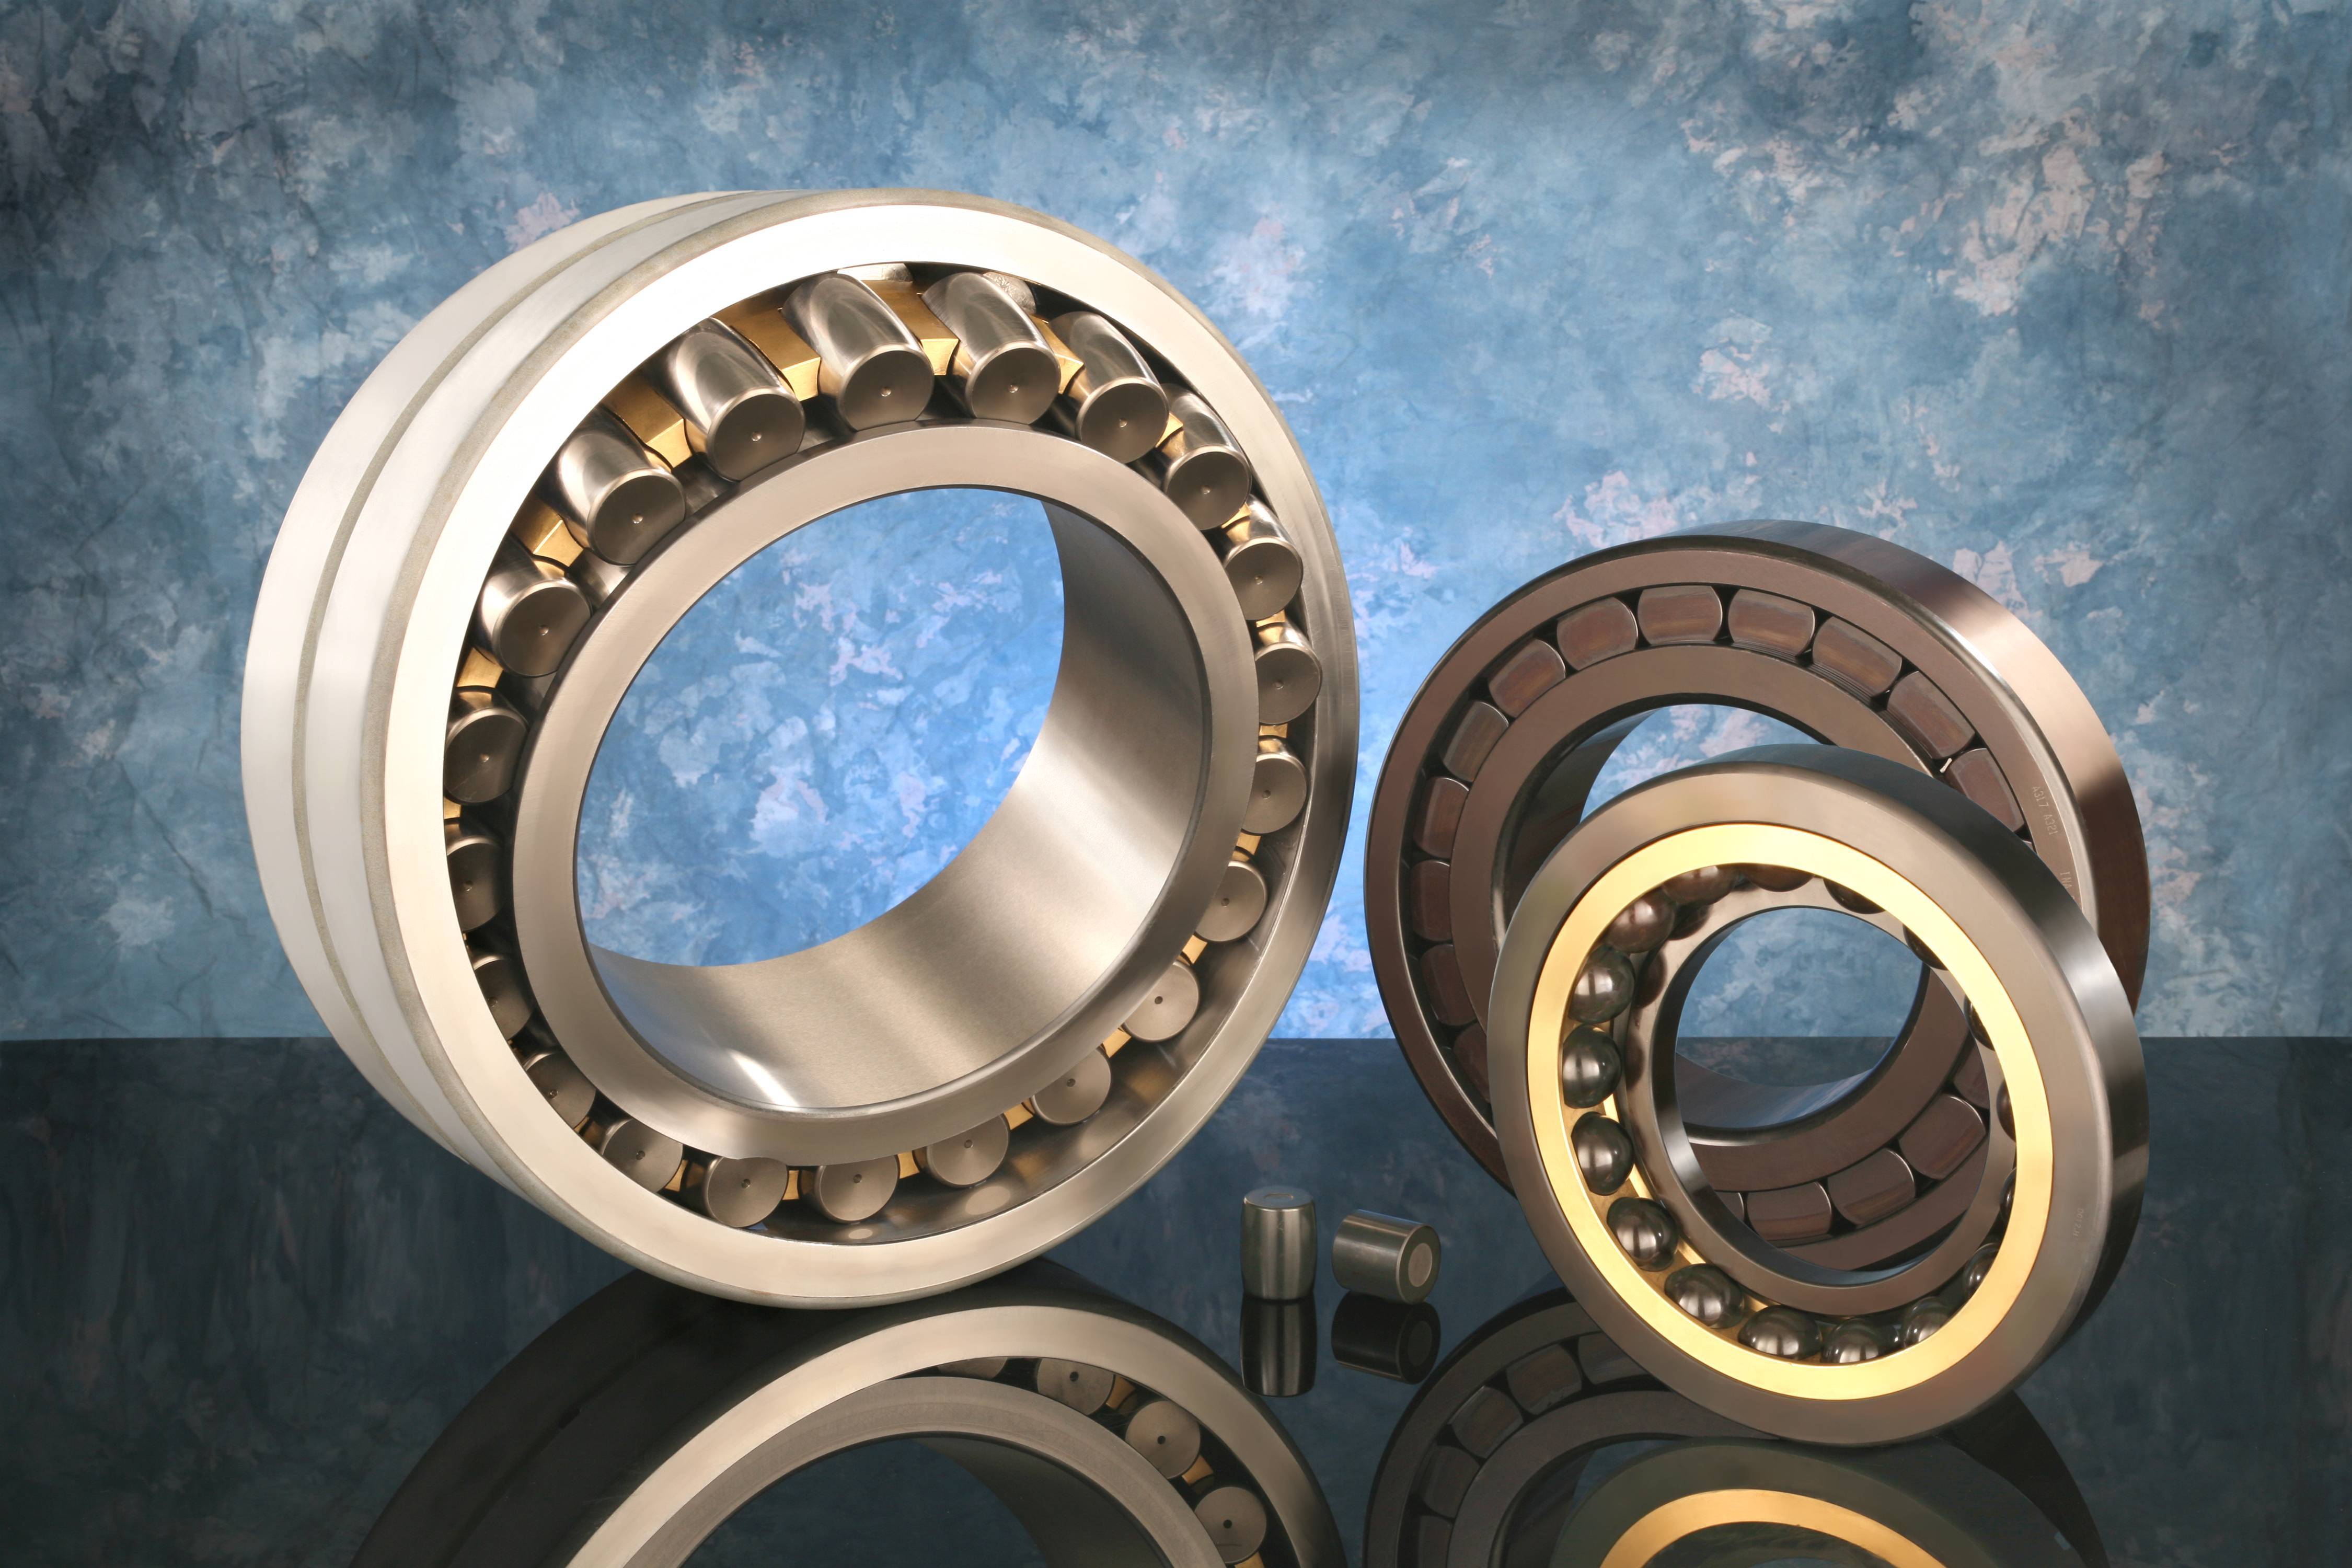 Spherical Roller Bearings Reduce Friction and Allow Smoother Rotation